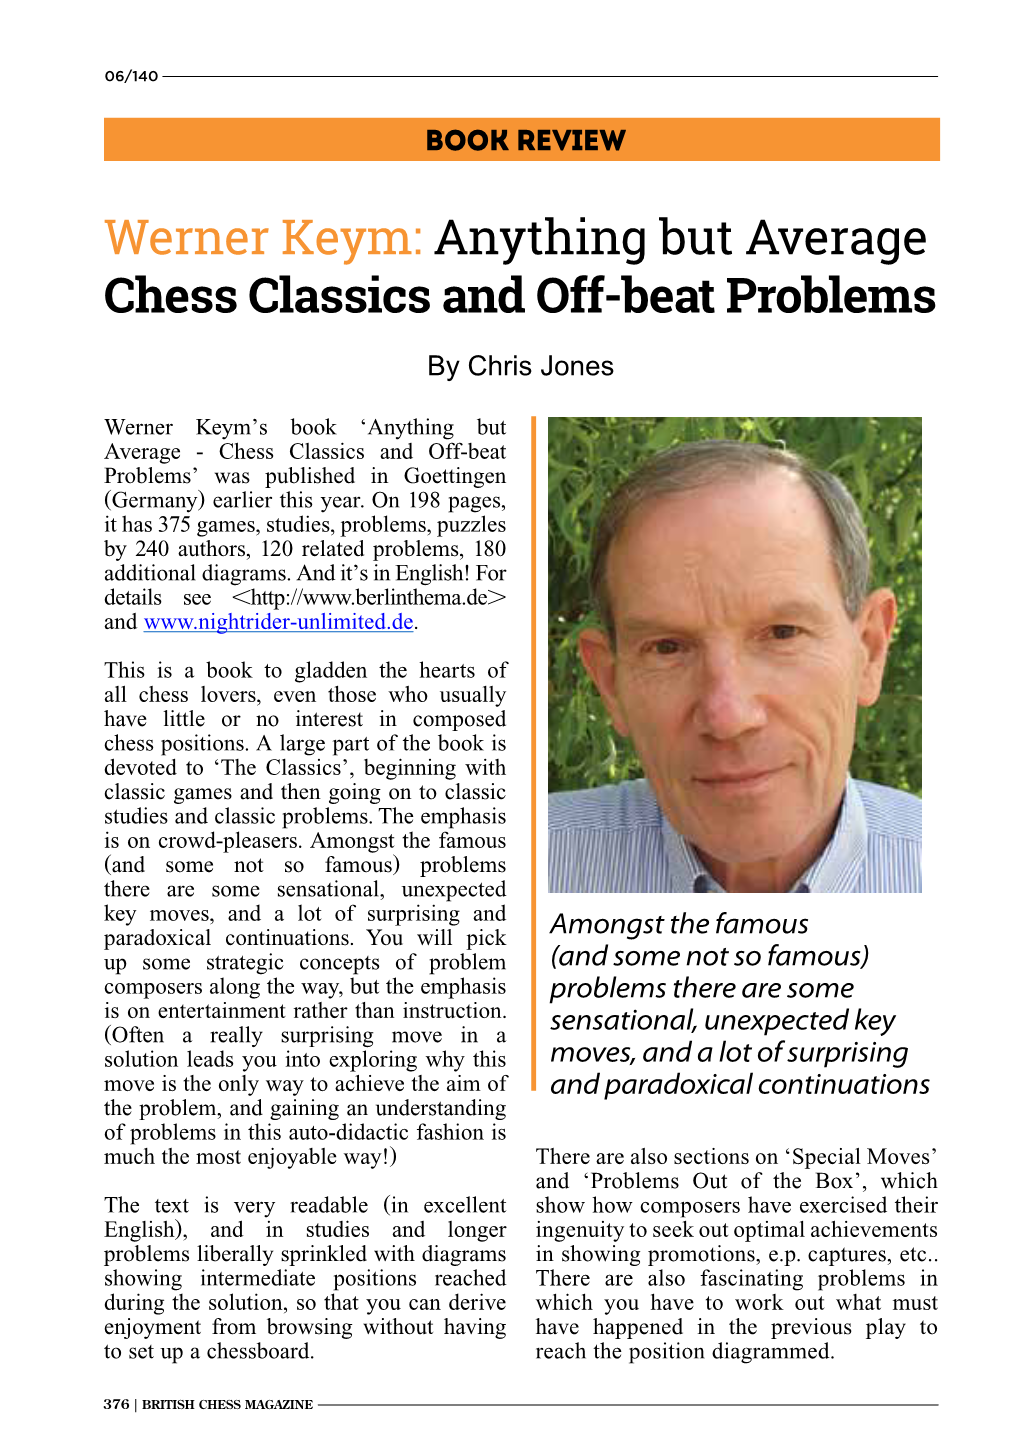 Anything but Average Chess Classics and Off-Beat Problems by Chris Jones